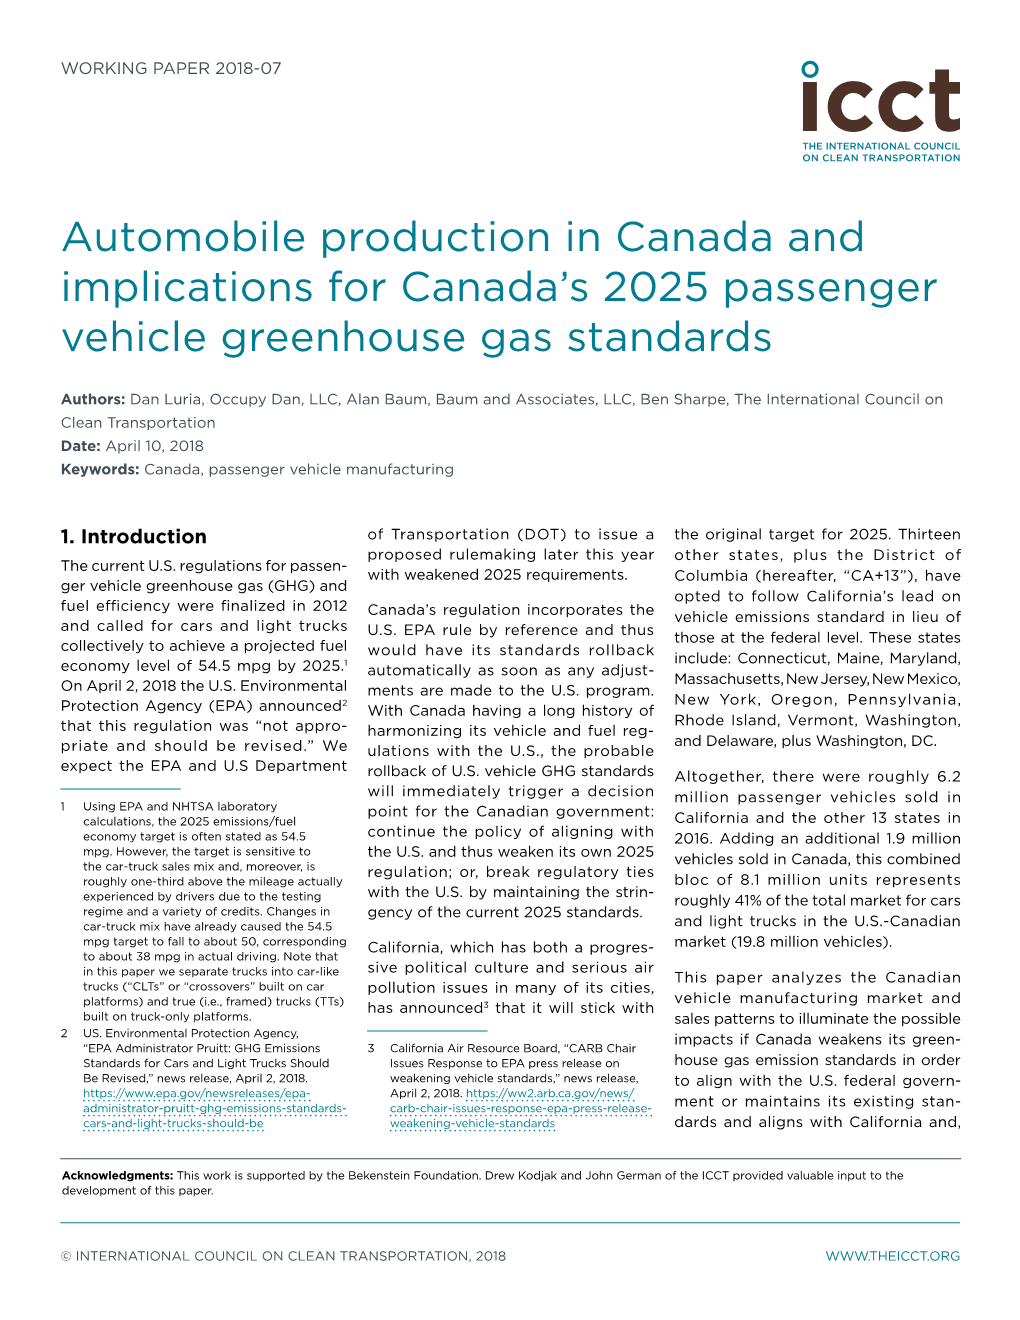 Automobile Production in Canada and Implications for Canada's 2025